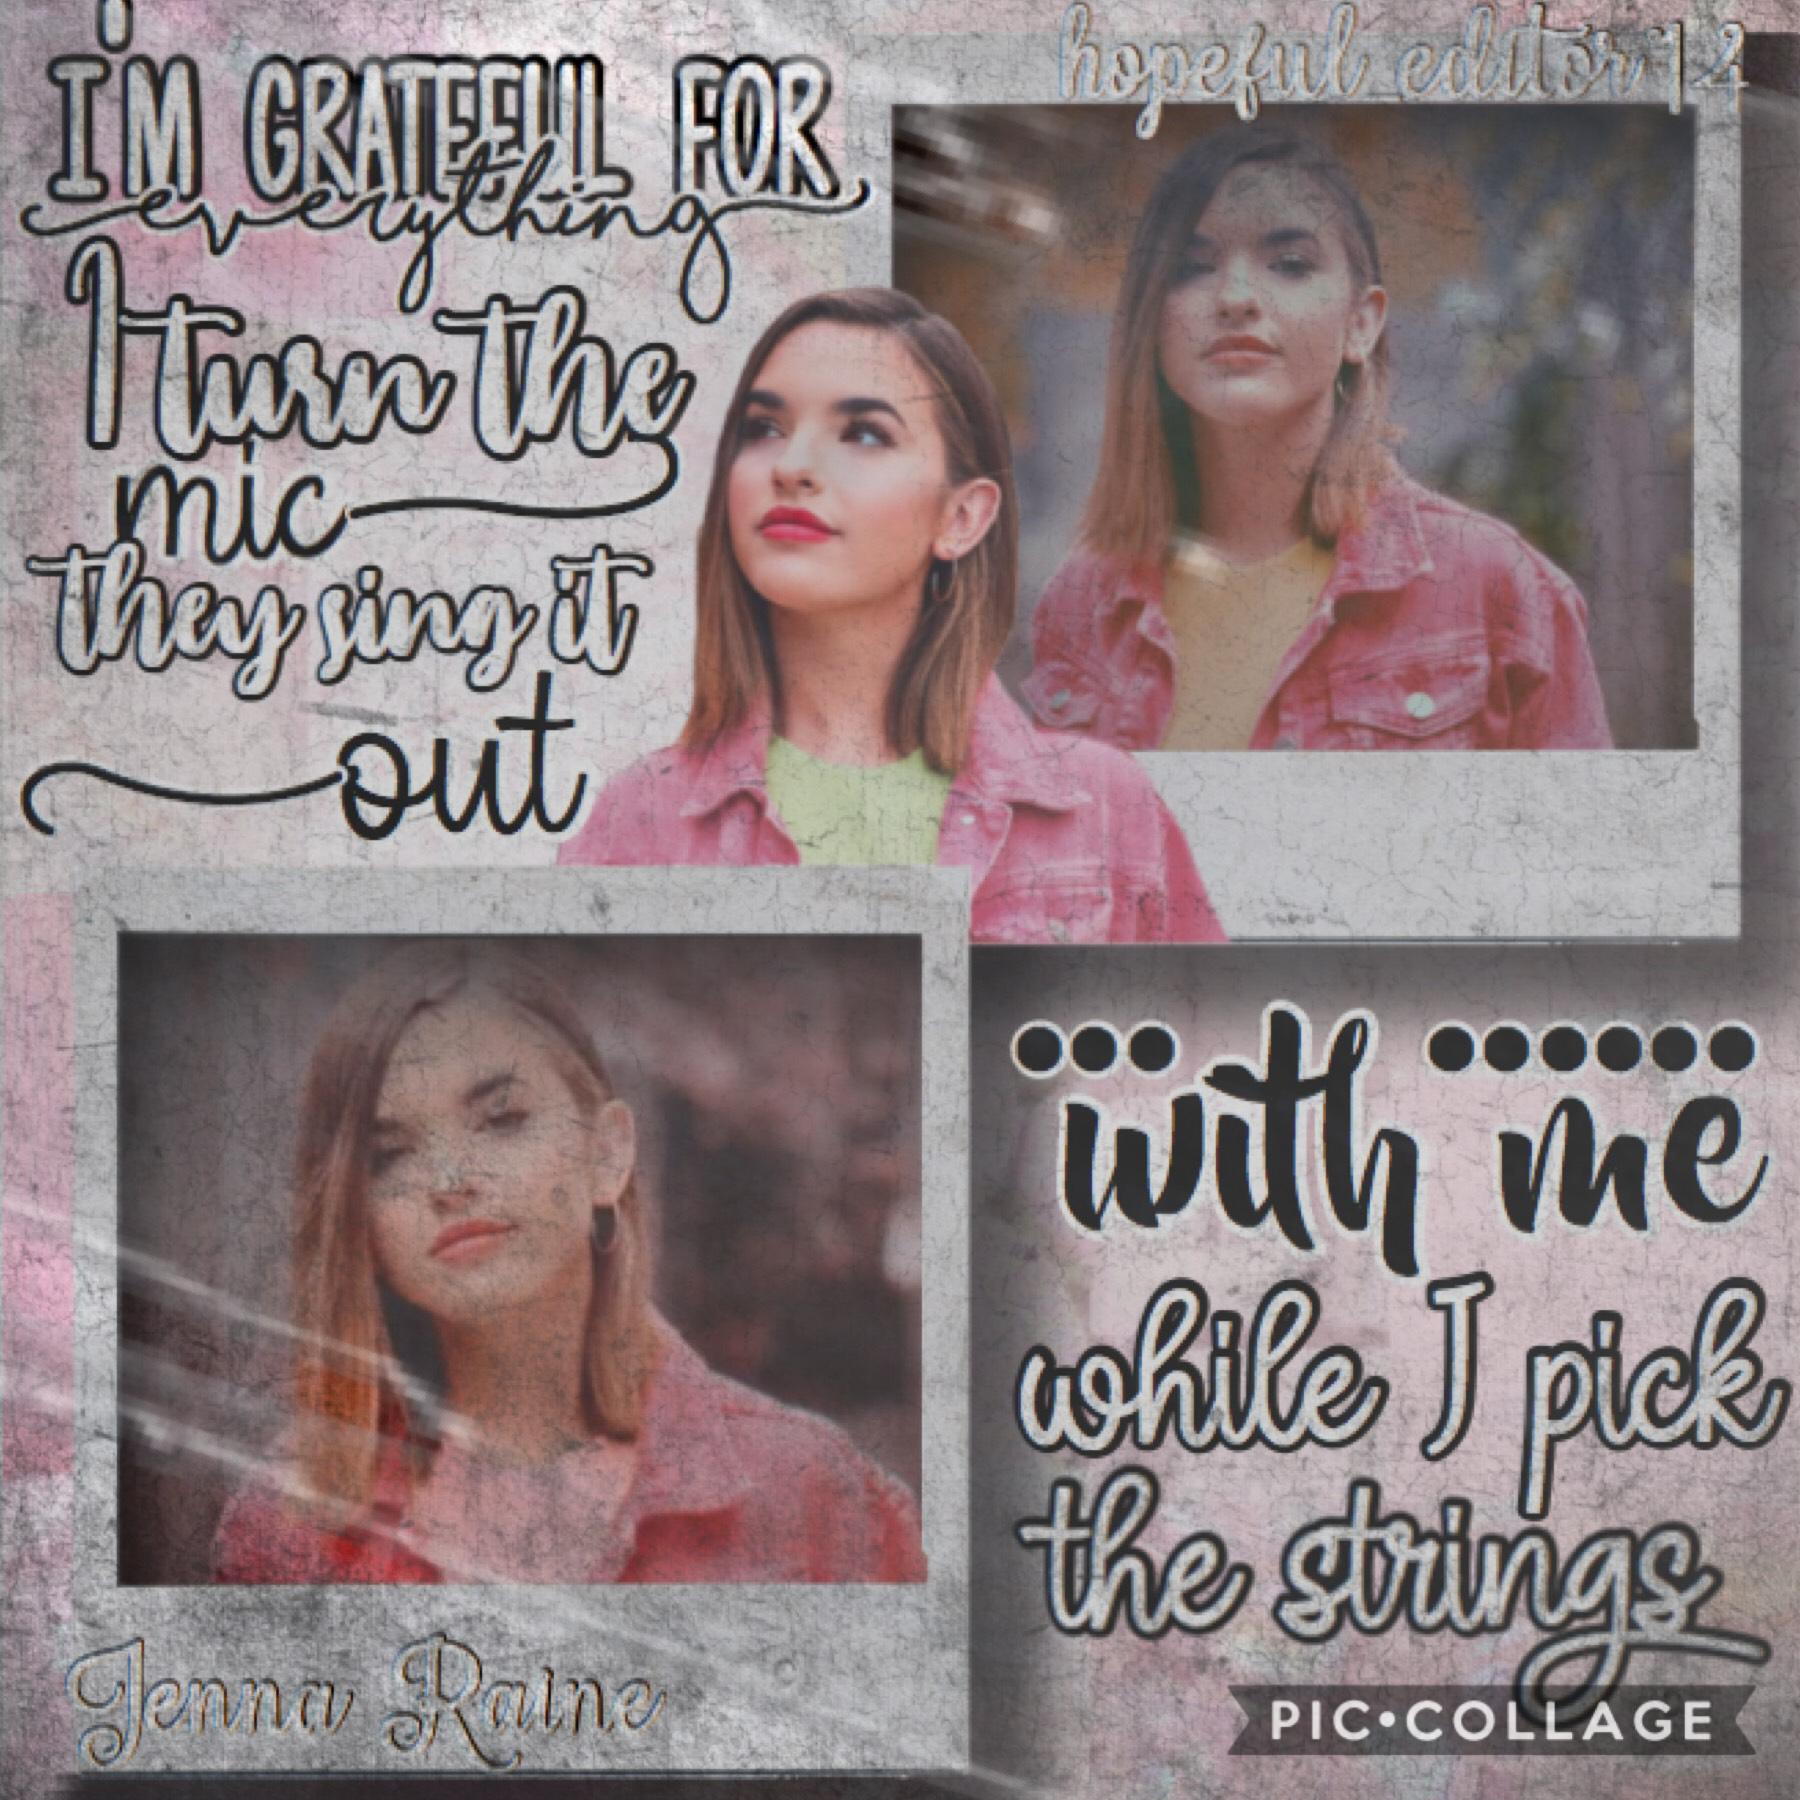 —> t. a. p <—
So, JENNA RAINE HAS NEW MUSIC!
These lyrics are from the song “My Escape” which I love so much!! I’m really not exaggerating when I say I listened to them nonstop yesterday. Please join the games on hopeful_fandoms! And icon contest on hopef